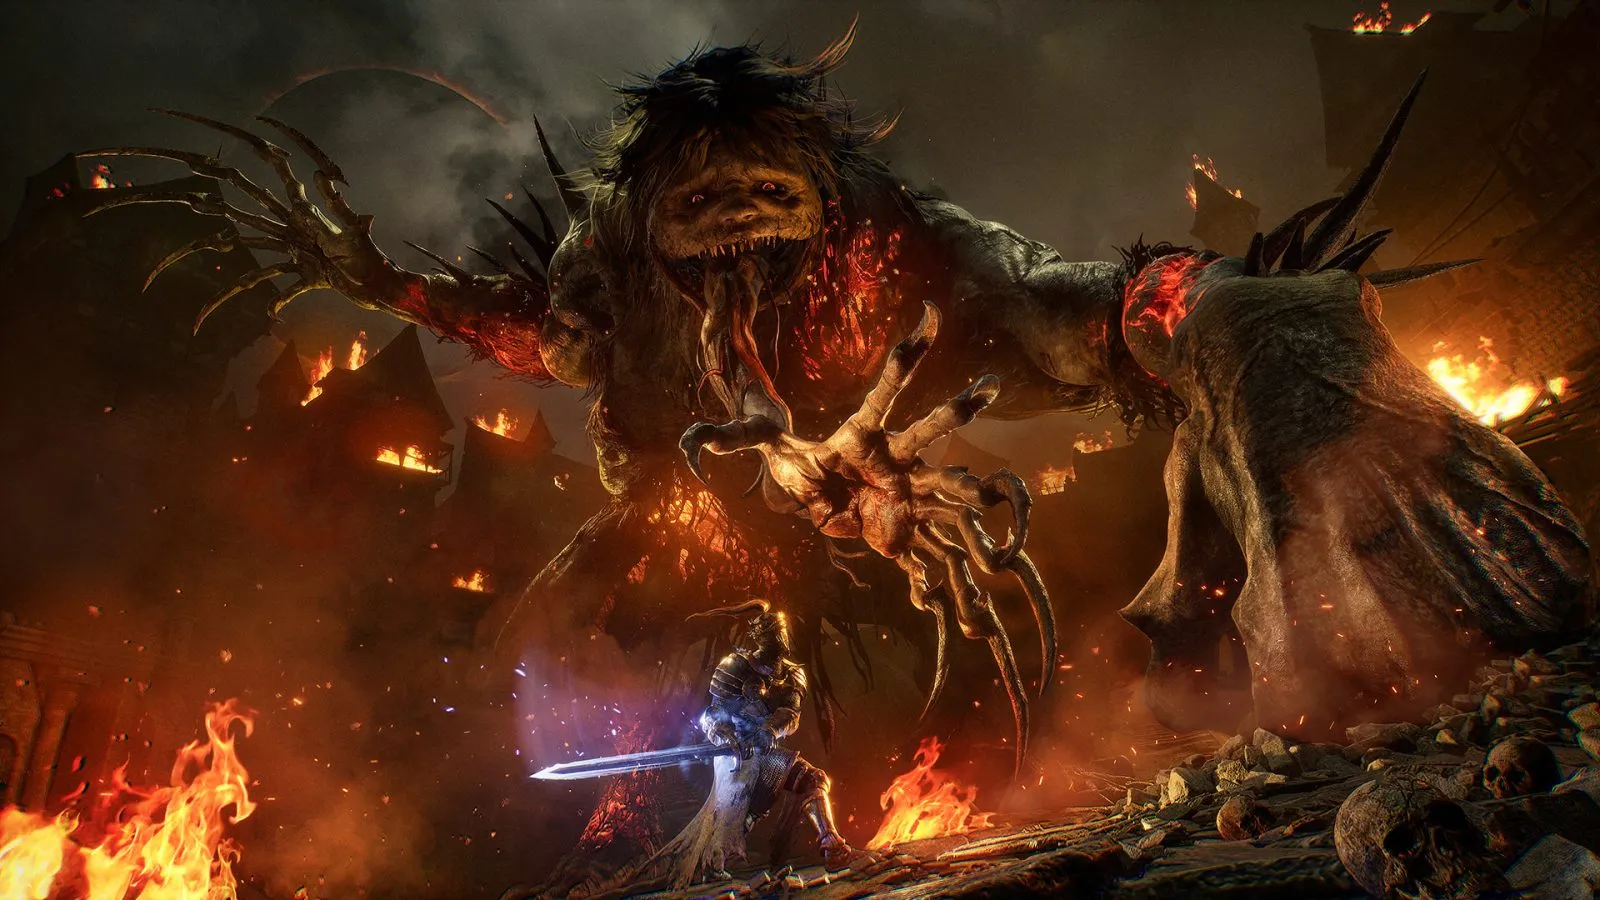 How To Reduce Encumbrance In Lords Of The Fallen? Lords Of The Fallen  Gameplay, Overview and More - News